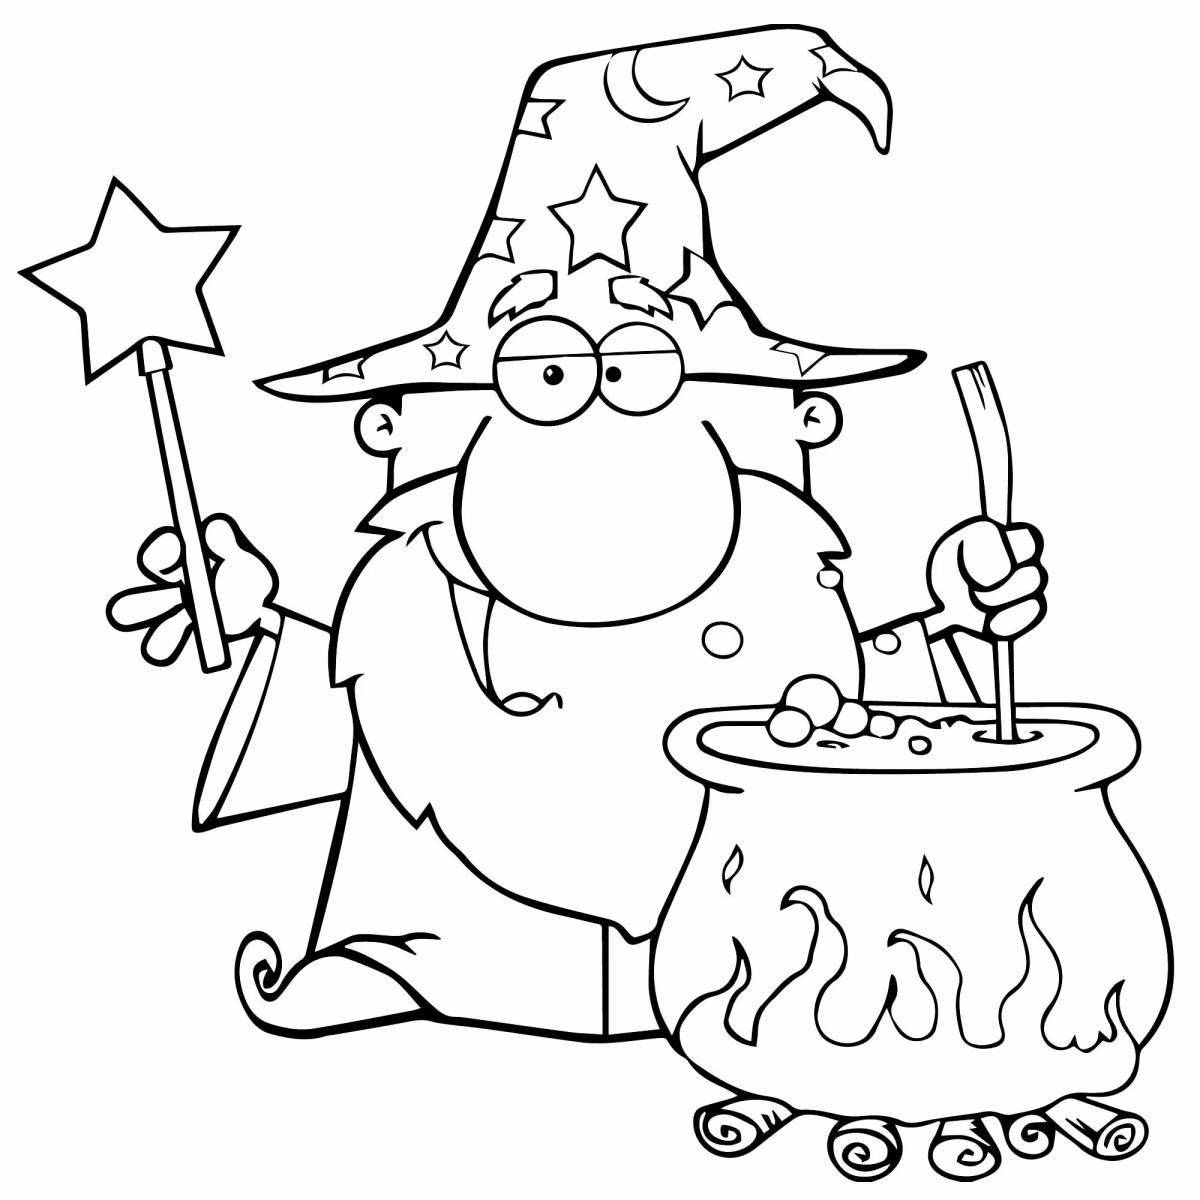 Exotic school of witchcraft and wizardry coloring book